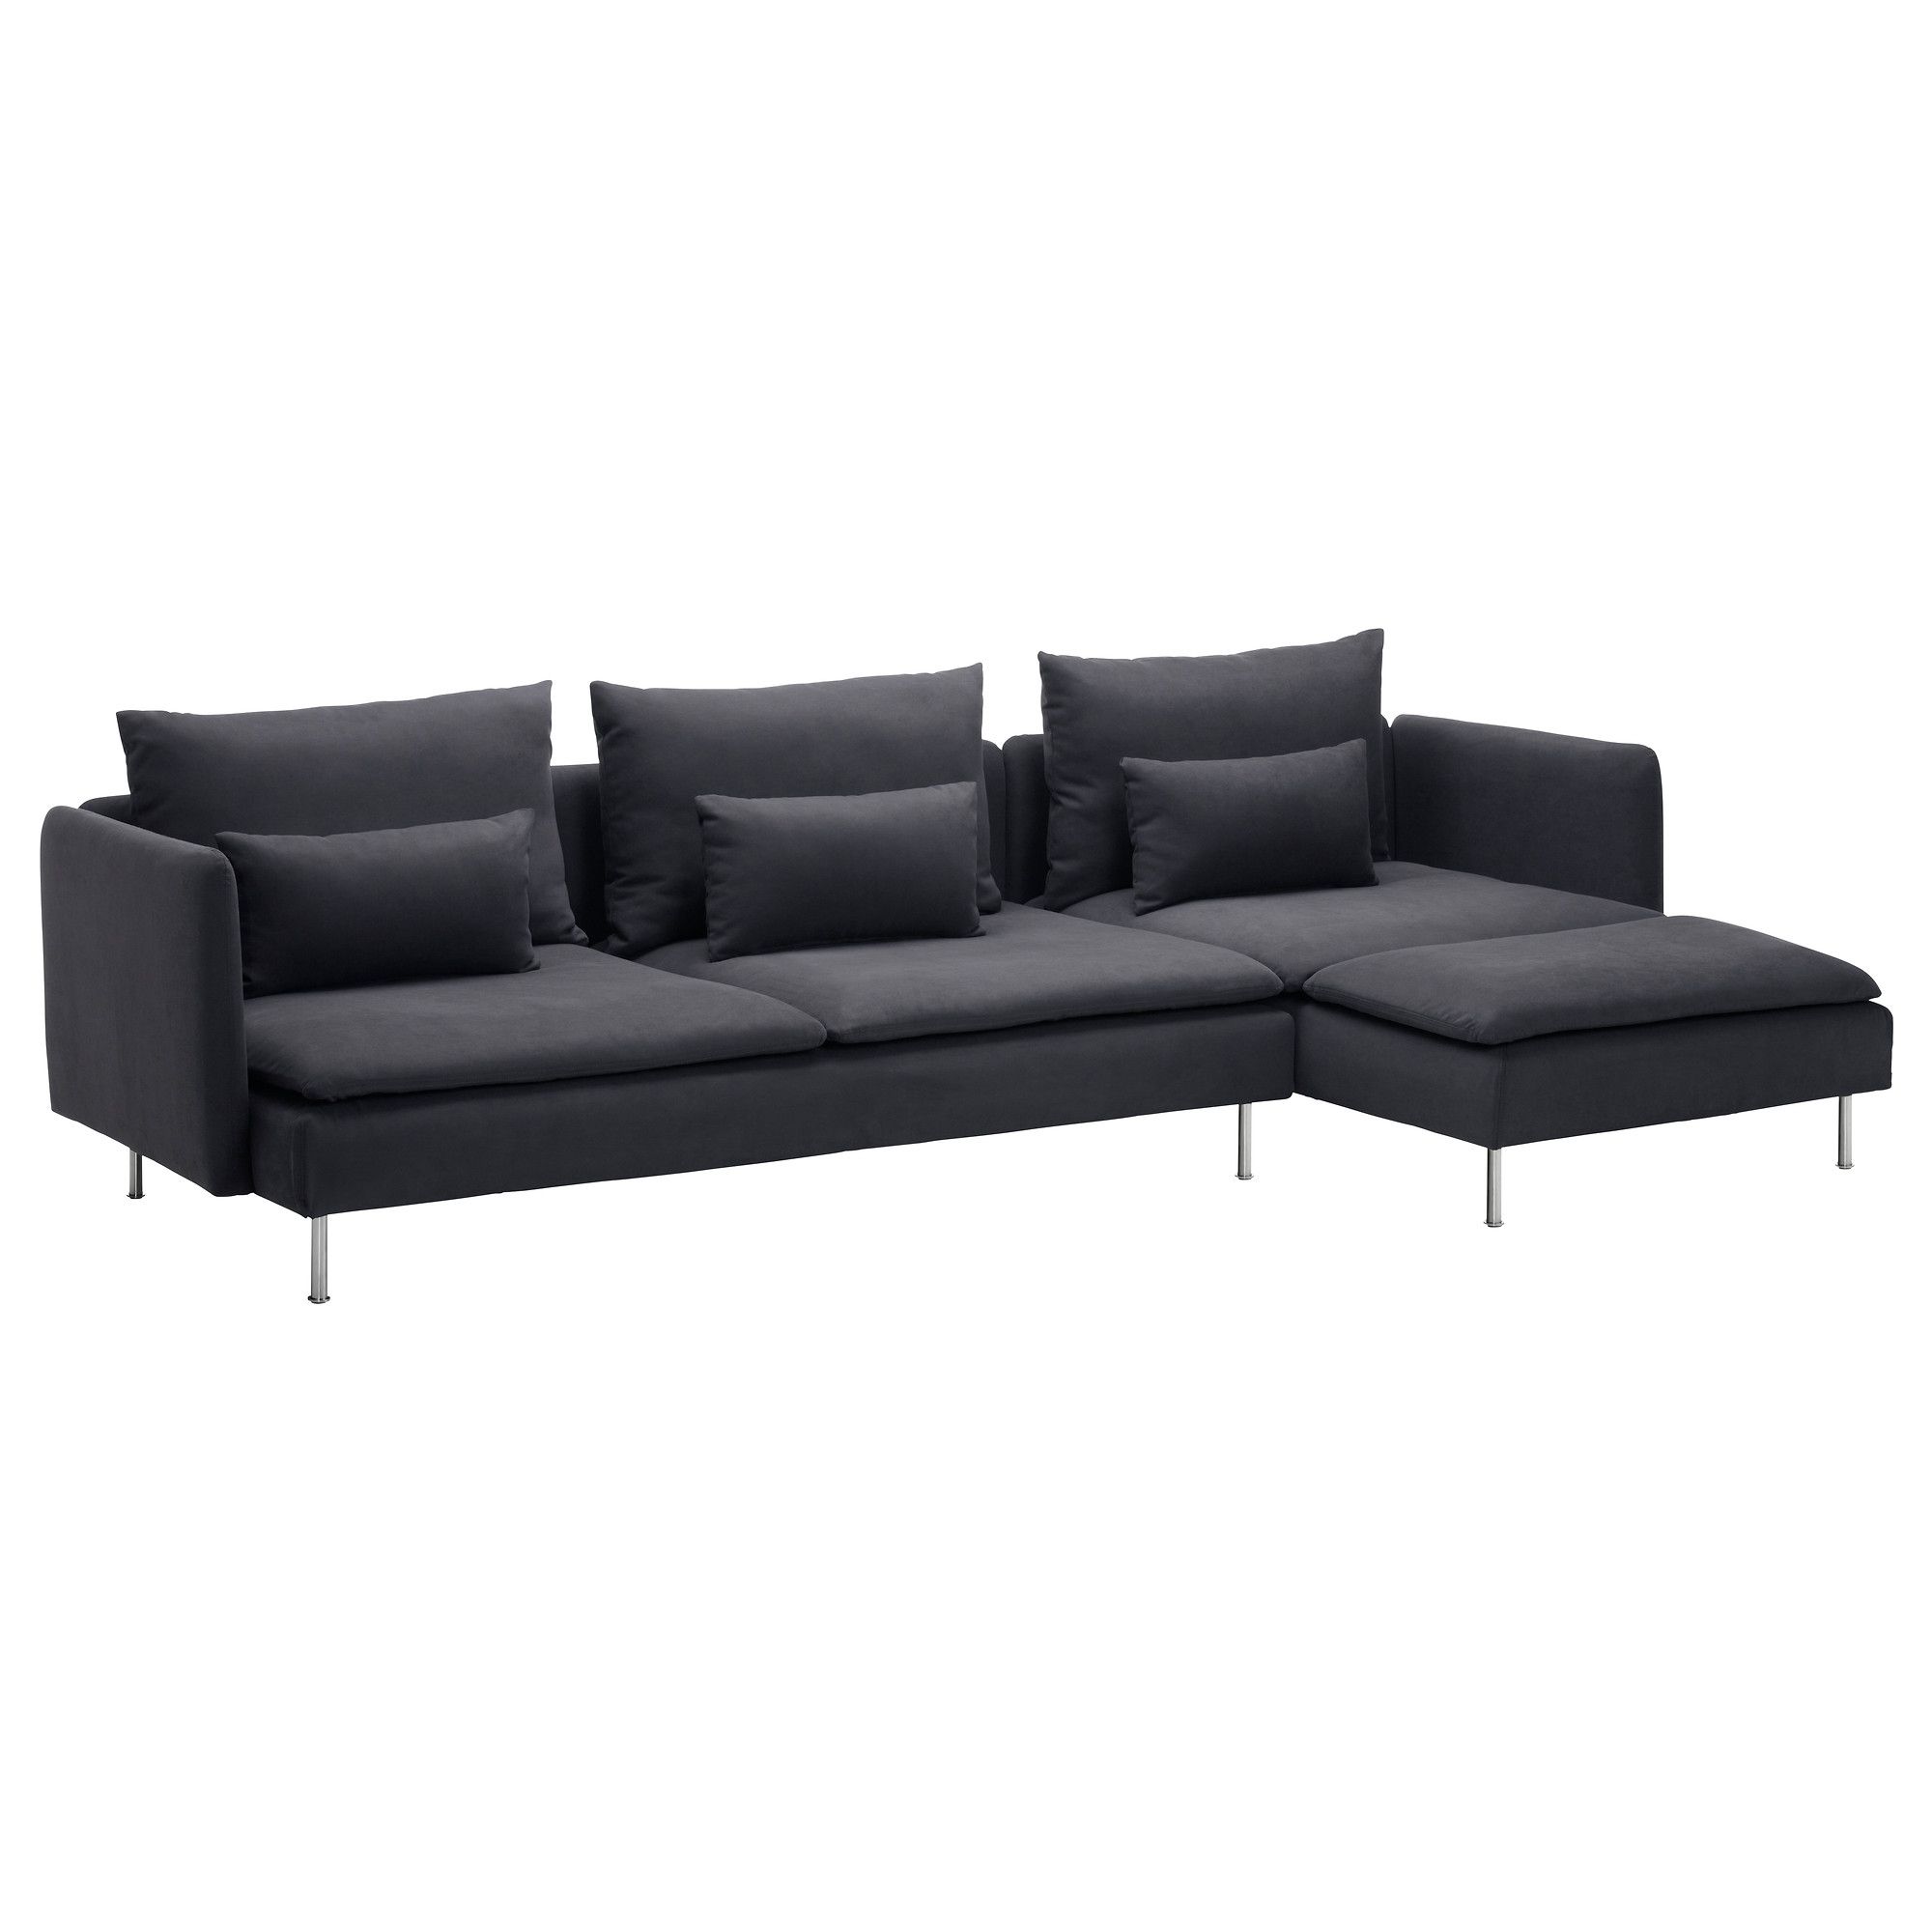 Söderhamn Sectional, 4 Seat – With Chaise/finnsta Turquoise – Ikea Inside Current Ikea Chaise Lounges (View 13 of 15)